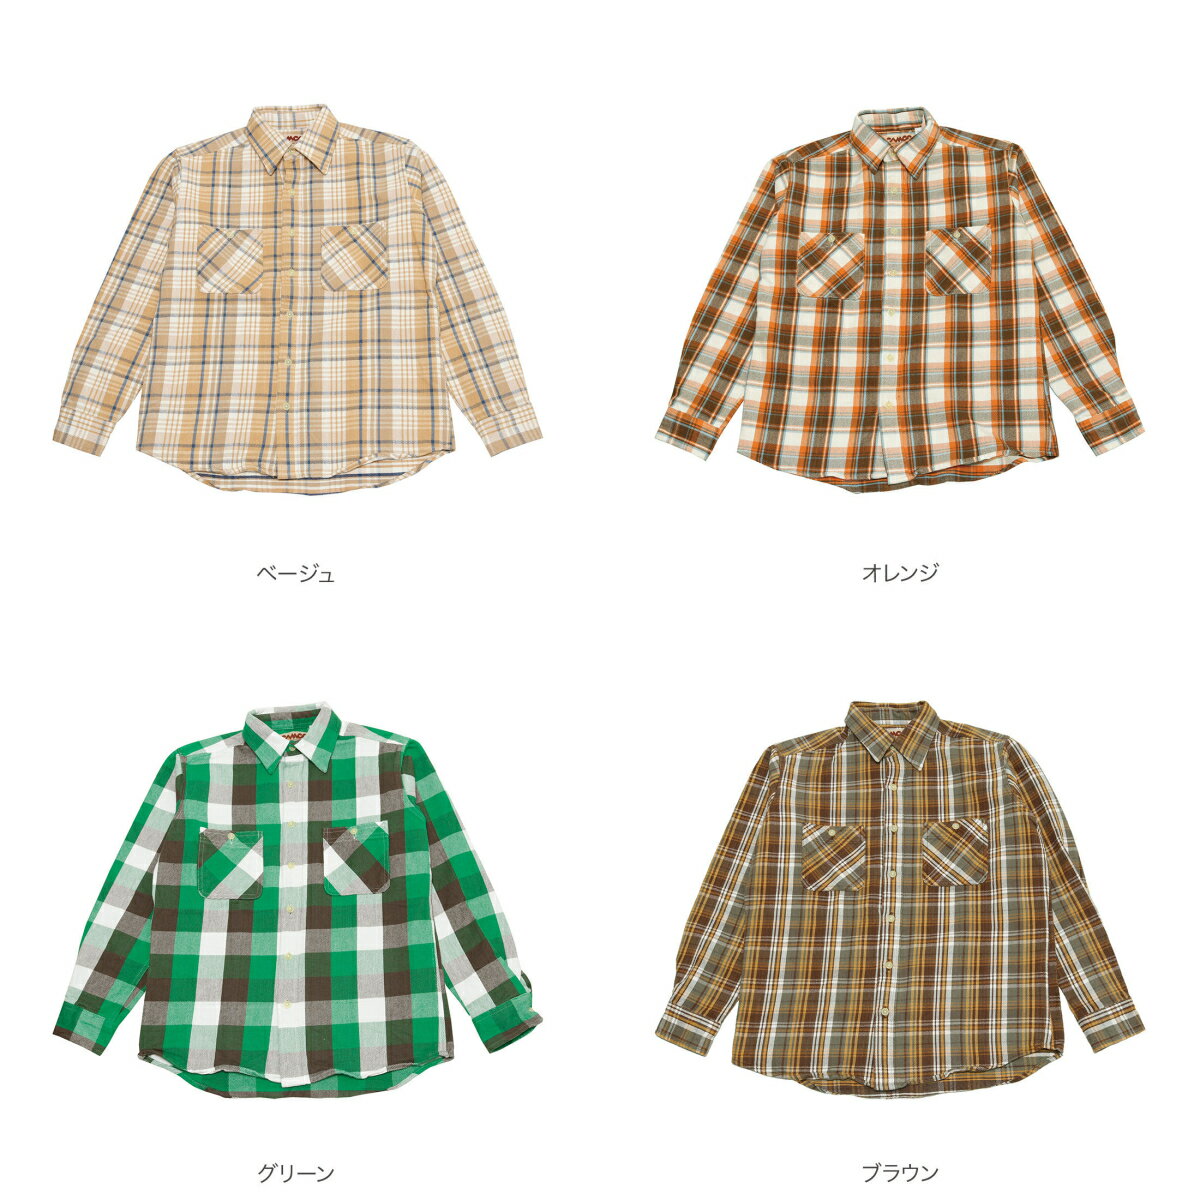 CAMCO［カムコ］FLANNEL SHIRT PLAID 1-031-202